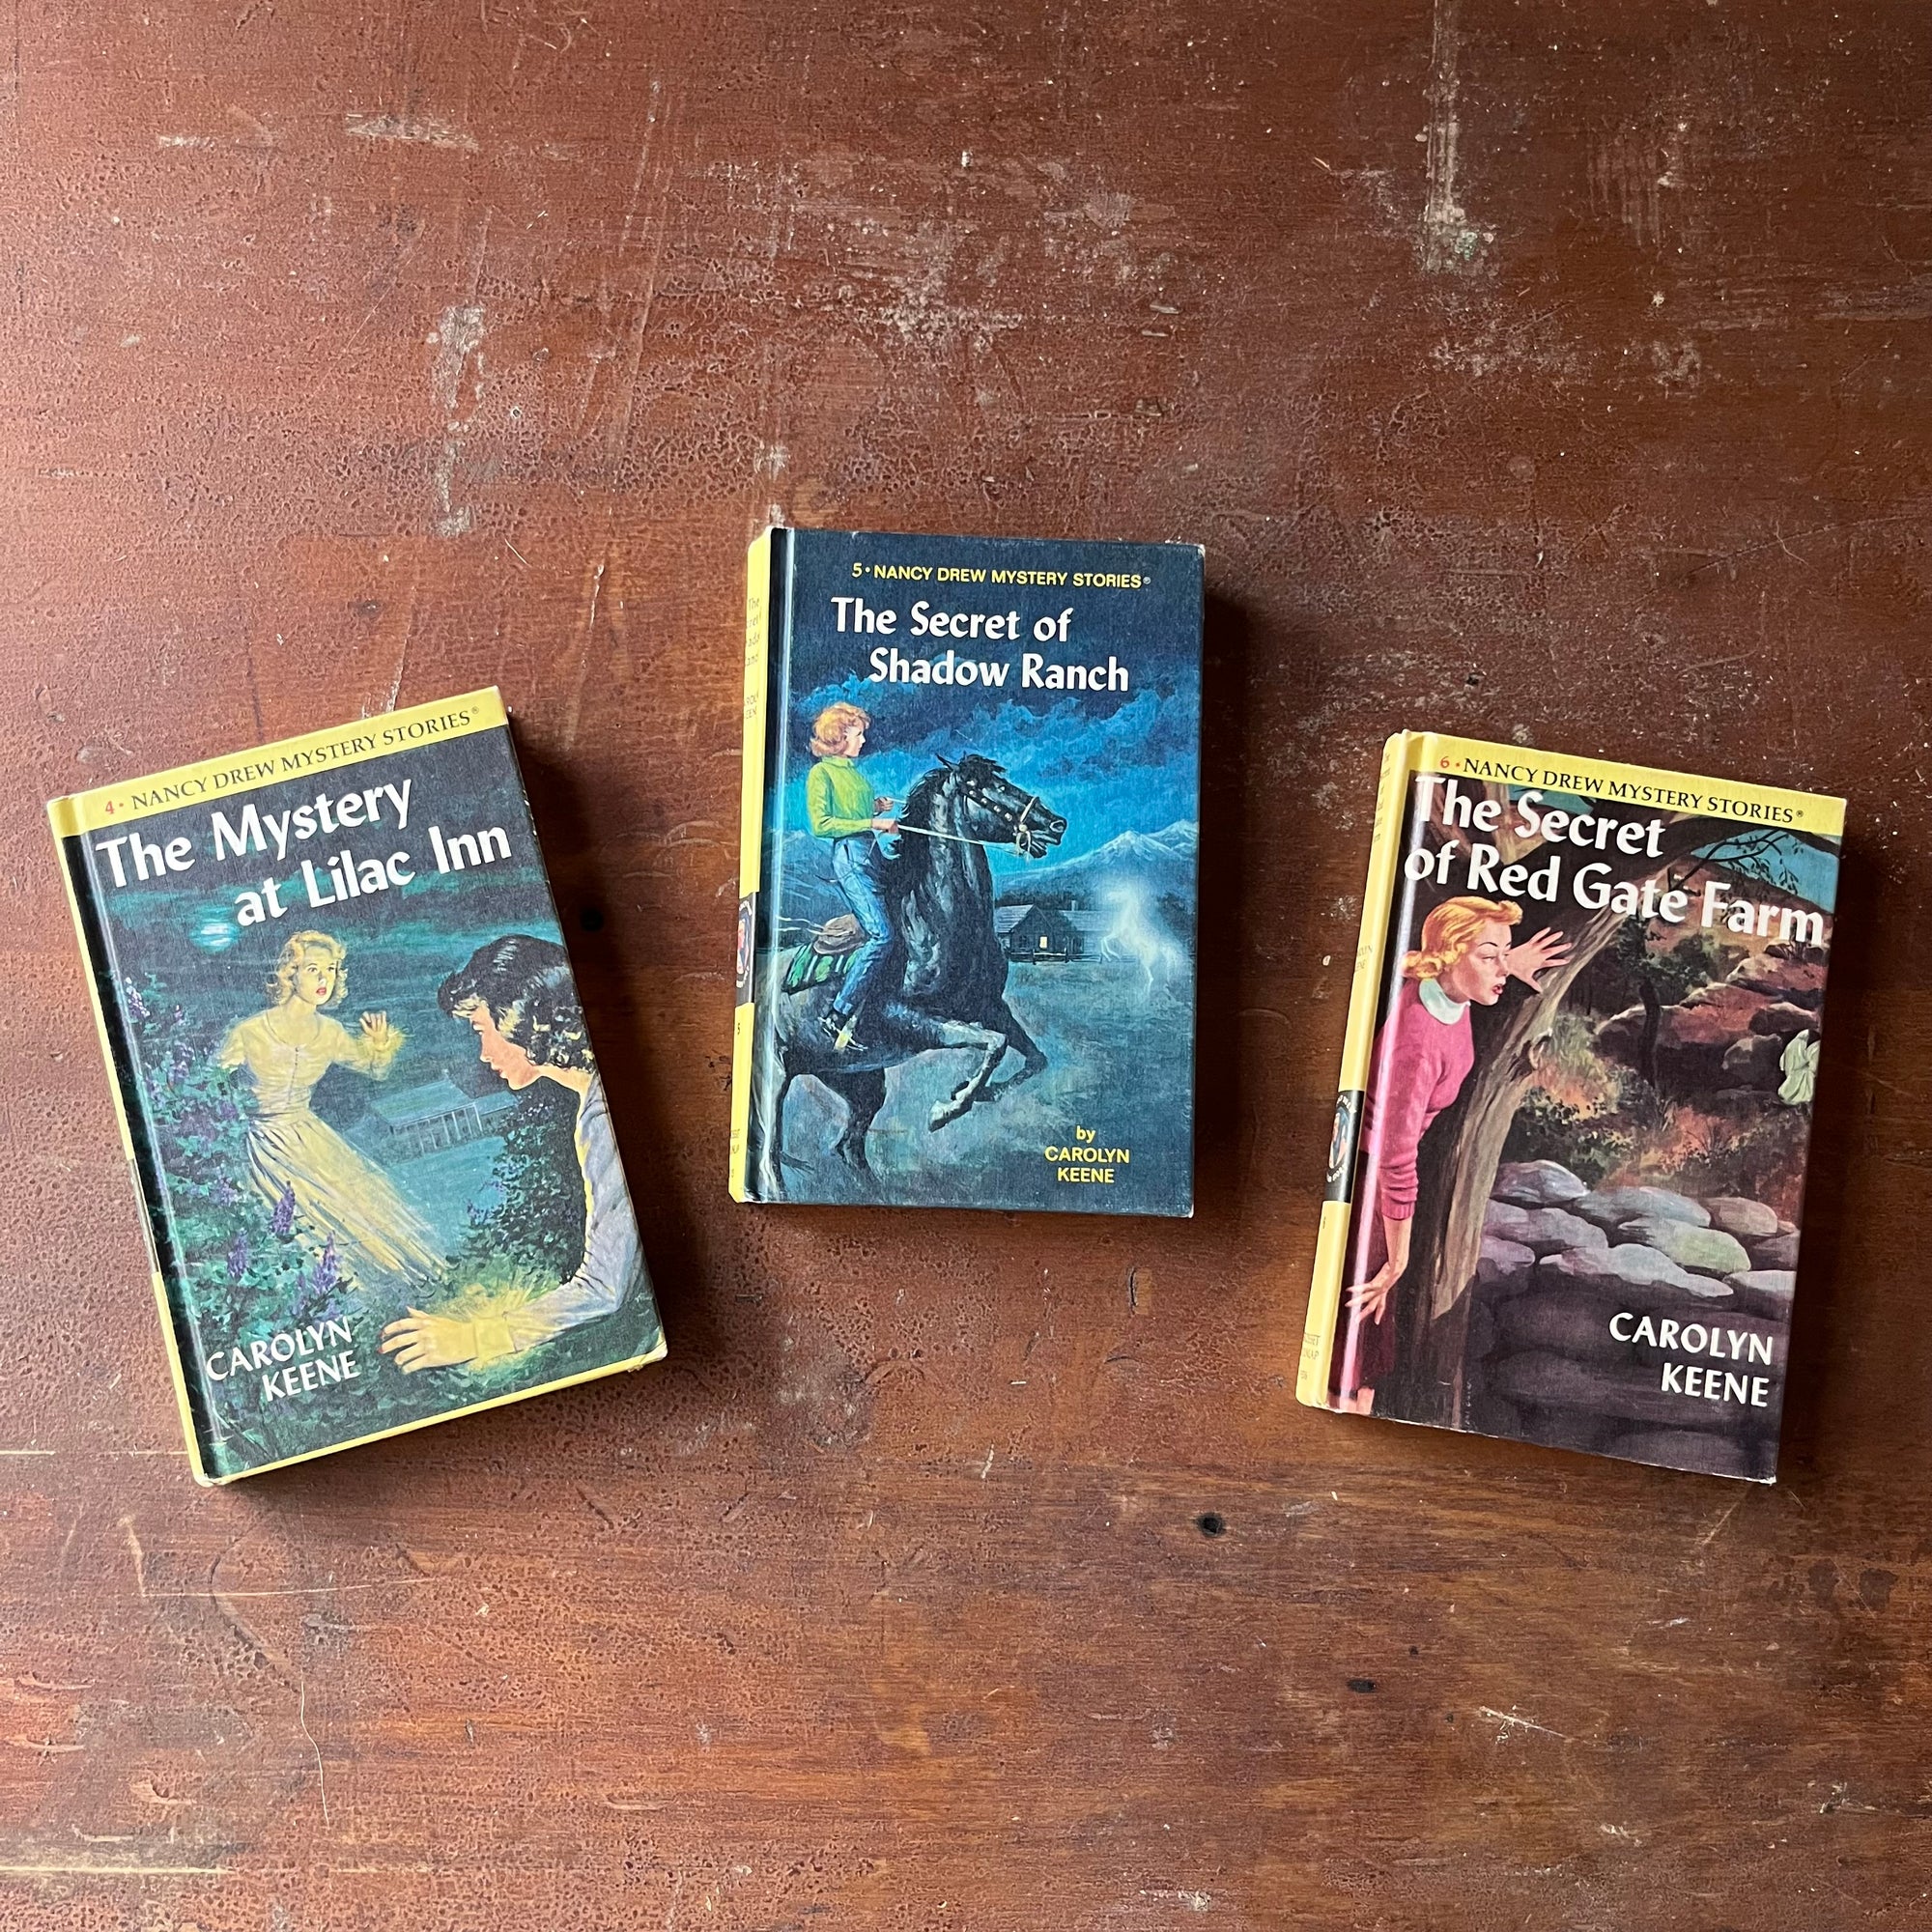 Set of Three Nancy Drew Mysteries by Carolyn Keene-The Mystery of Lilac Inn, The Secret of Shadow Ranch, and The Secret of Red Gate Farm-vintage children's chapter books-view of the front covers with illustrations of scenes from each book